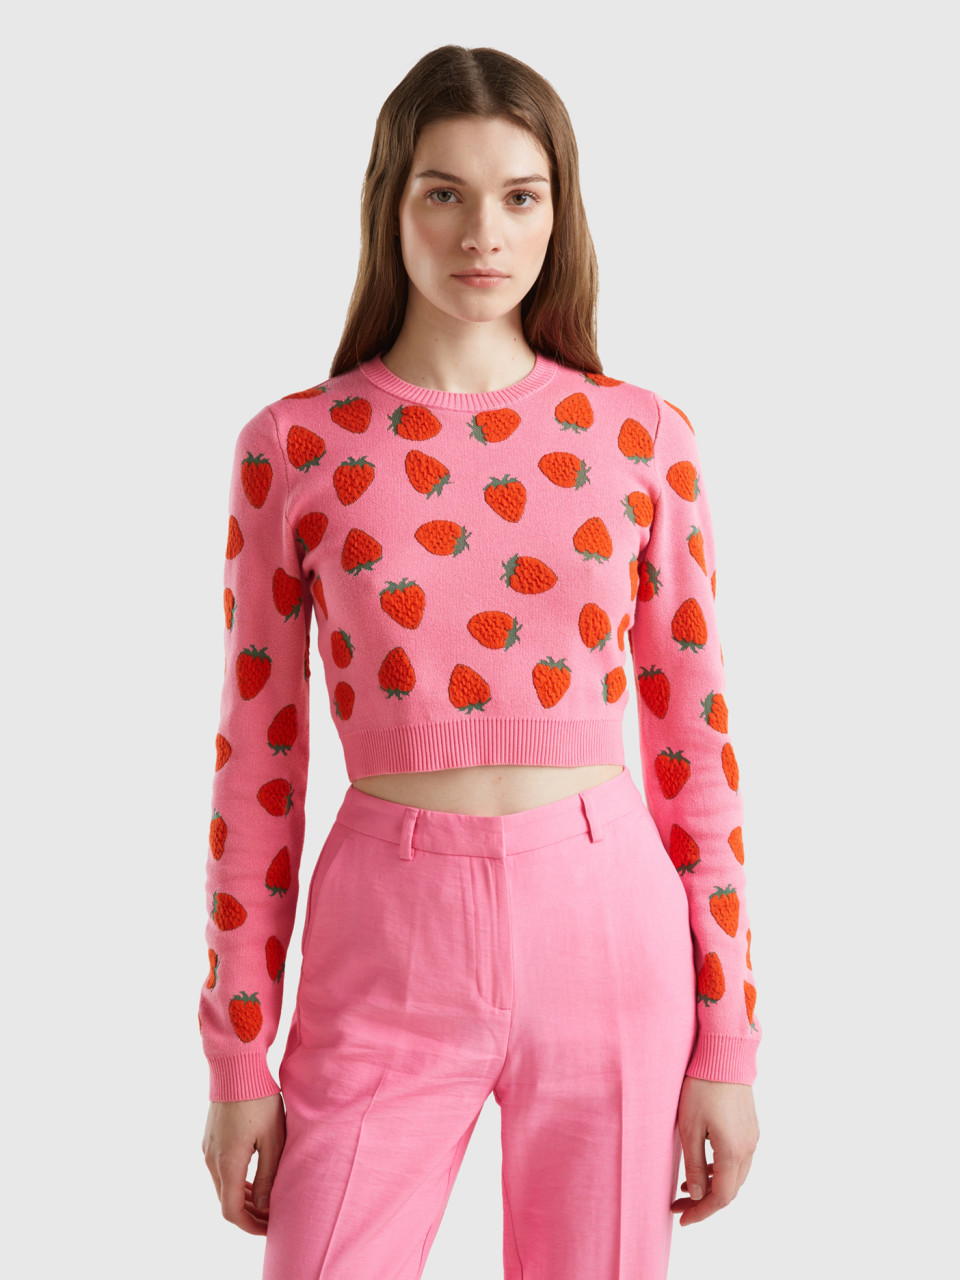 Benetton, Cropped Pullover In Rosa Mit Erdbeermuster, Pink, female